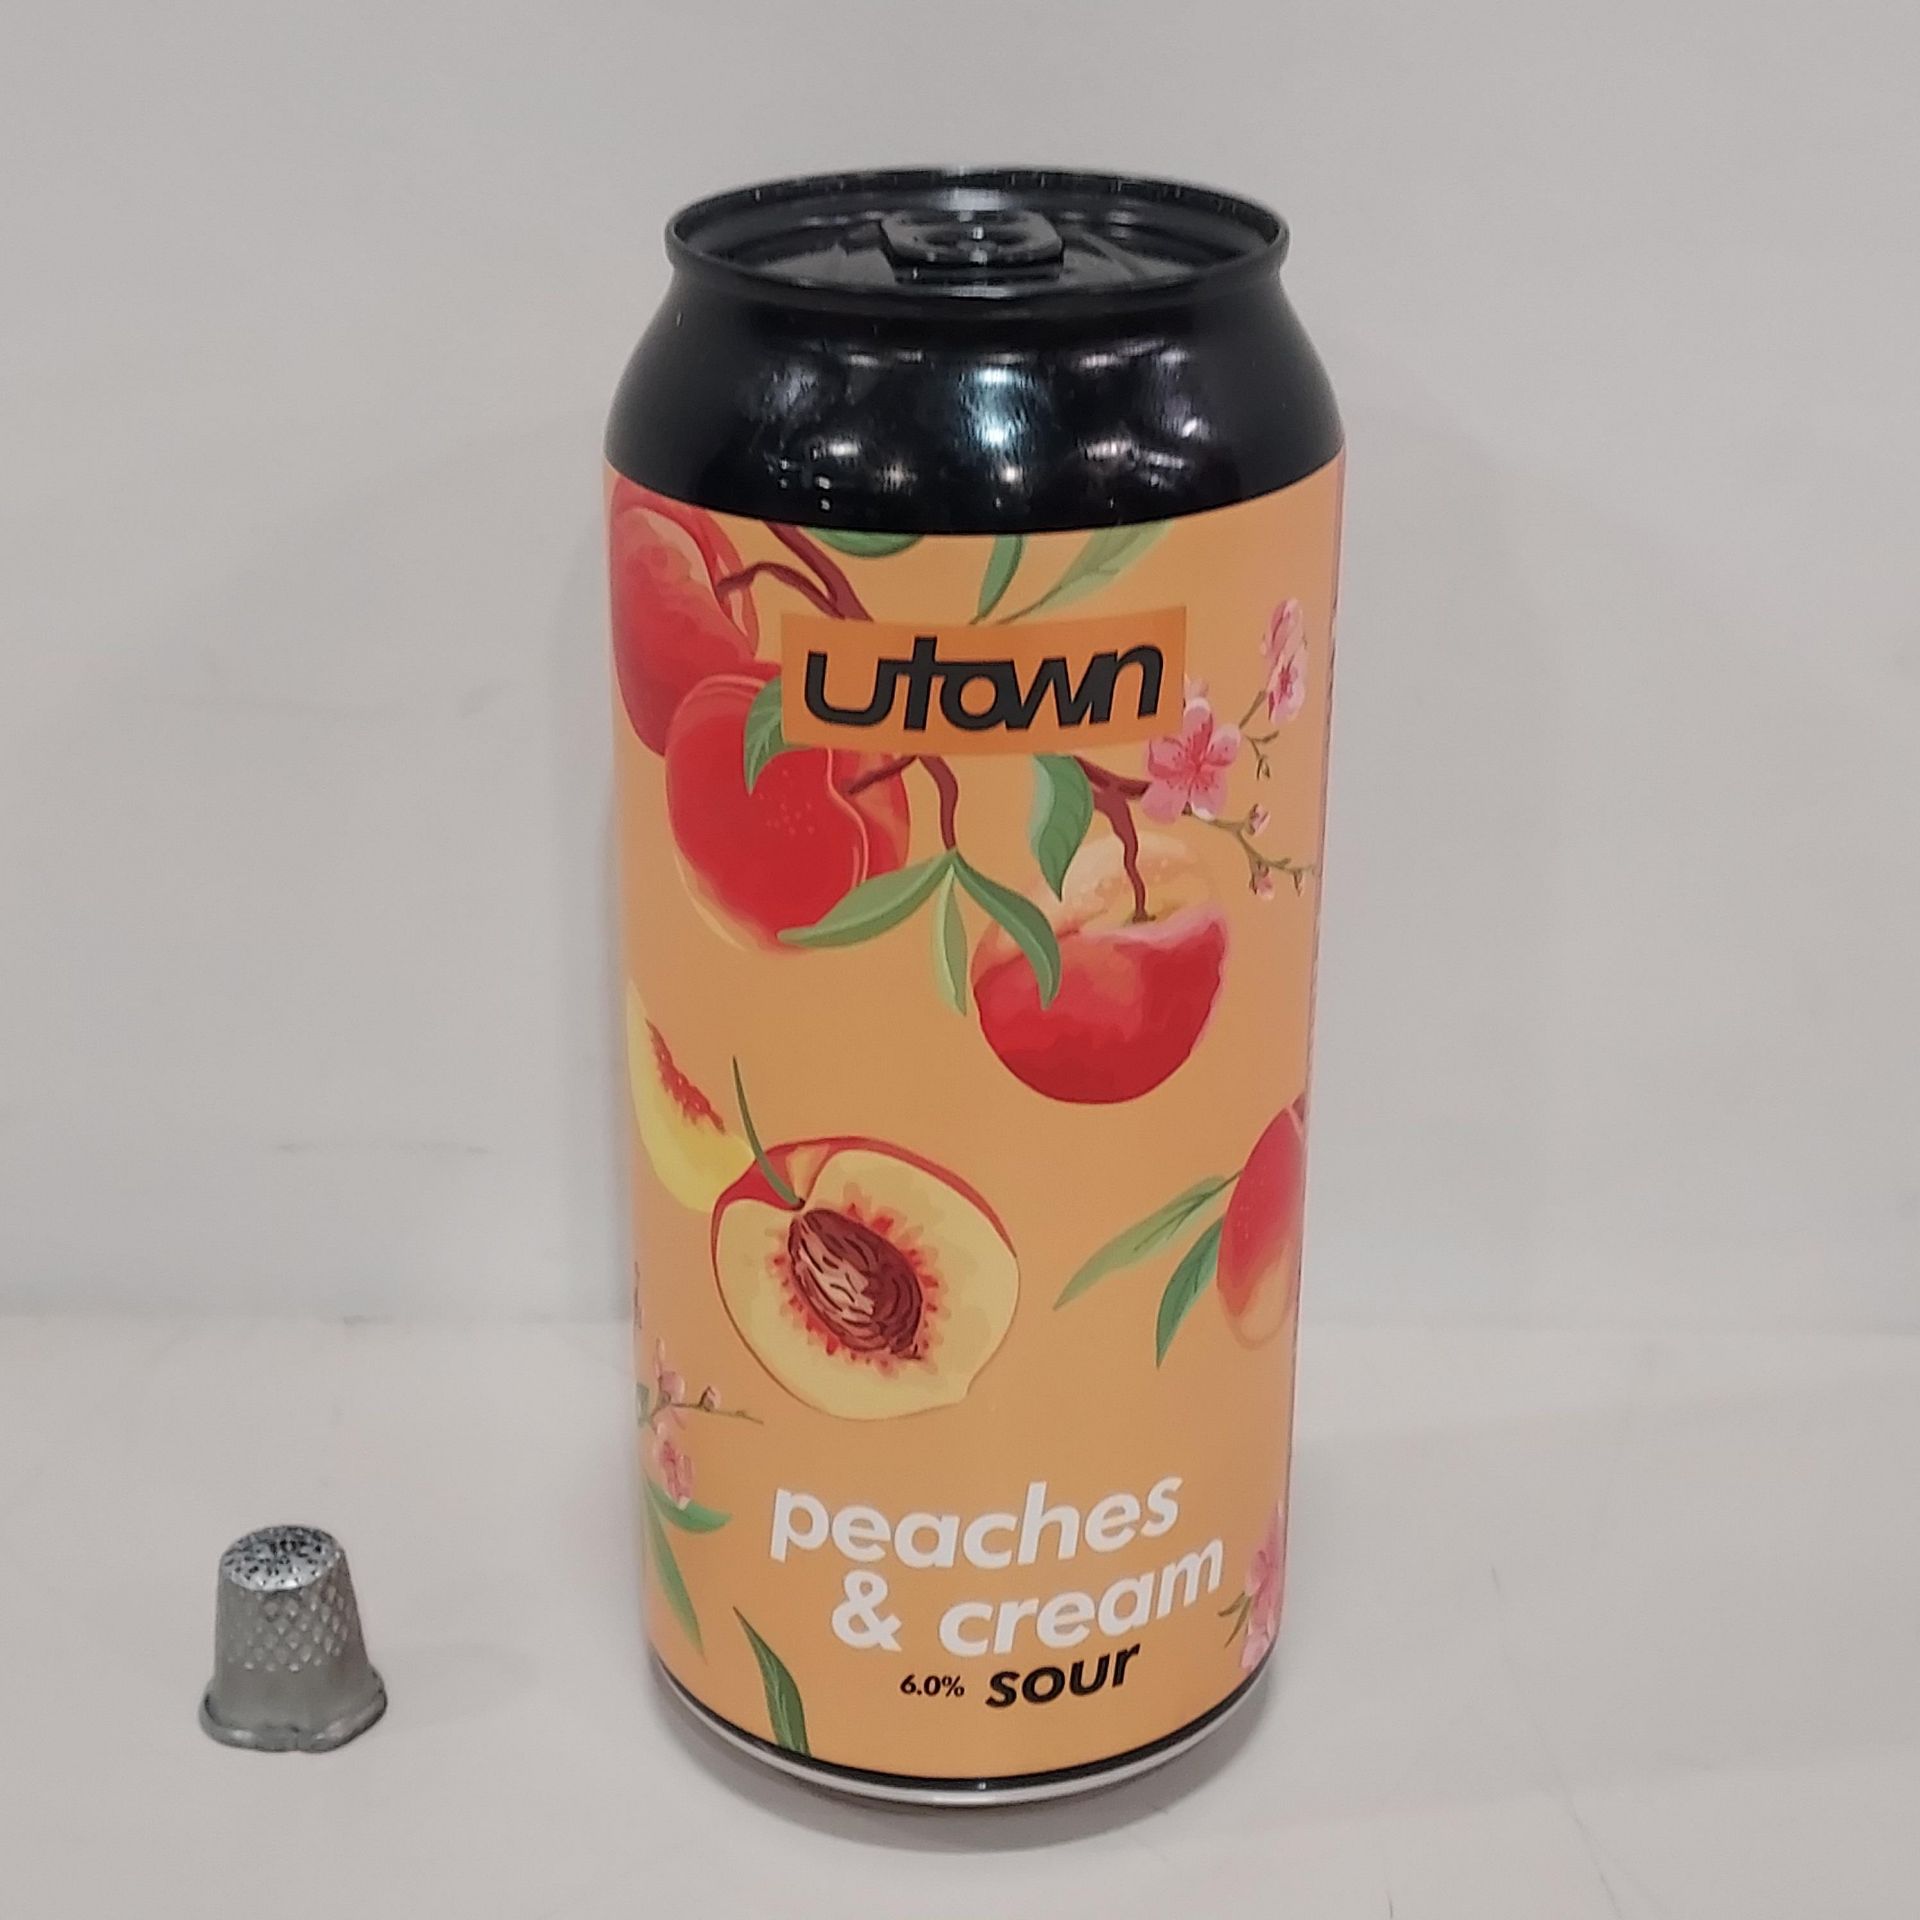 120 X BRAND NEW 440ML CANS OF UTOWN PEACHES & CREAM SOUR BEER 6.0% ALCOHOL IN 5 BOXES (BBE APR